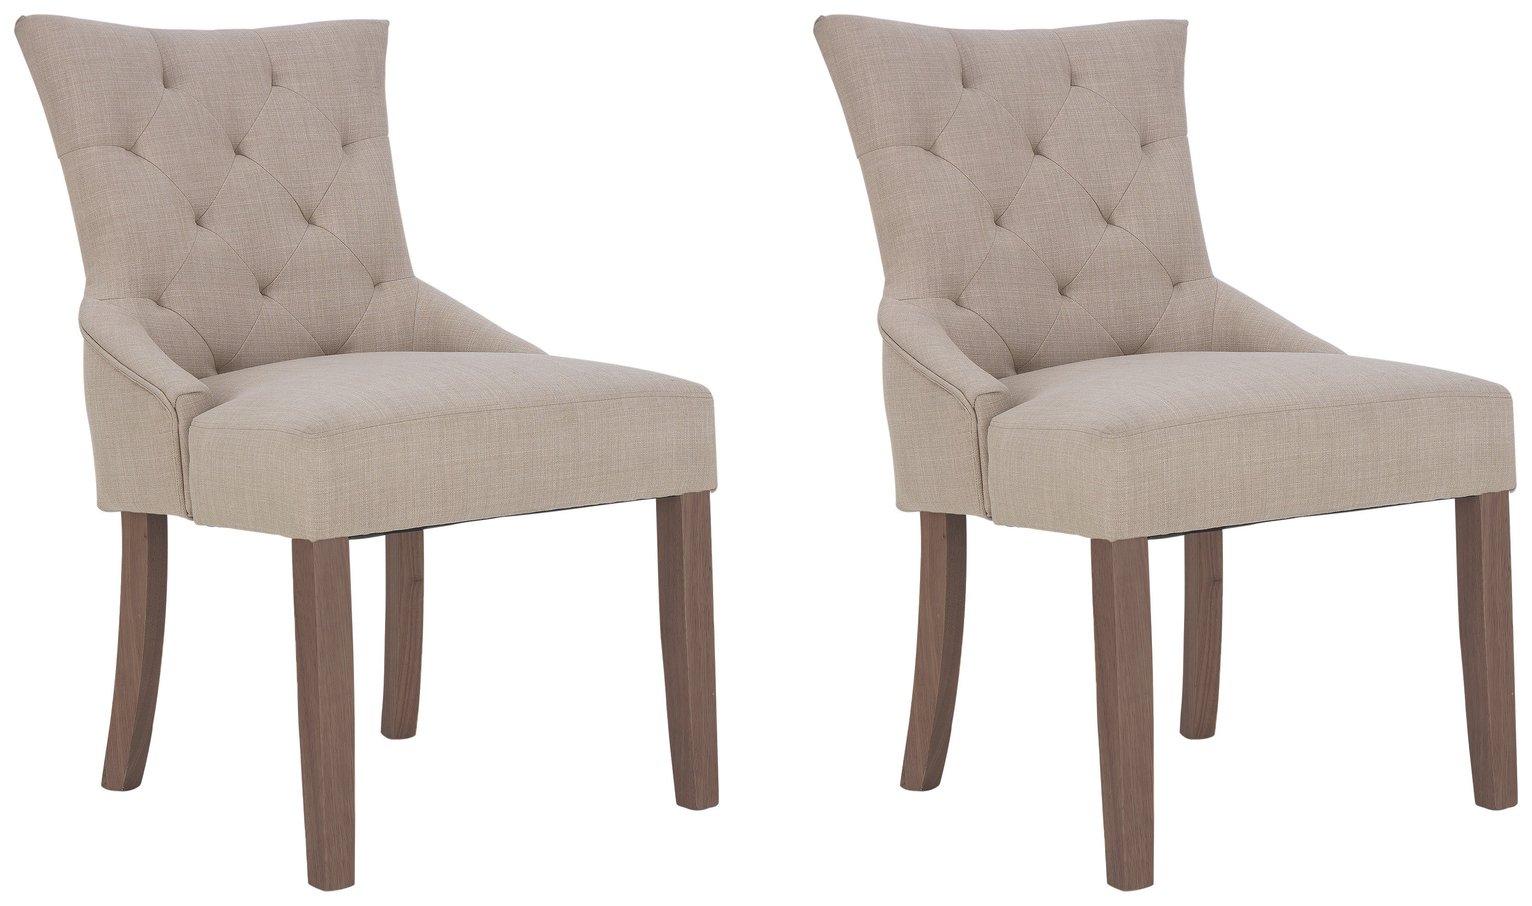 Argos Home Pin Tuck Pair of Chairs - Oatmeal/Walnut